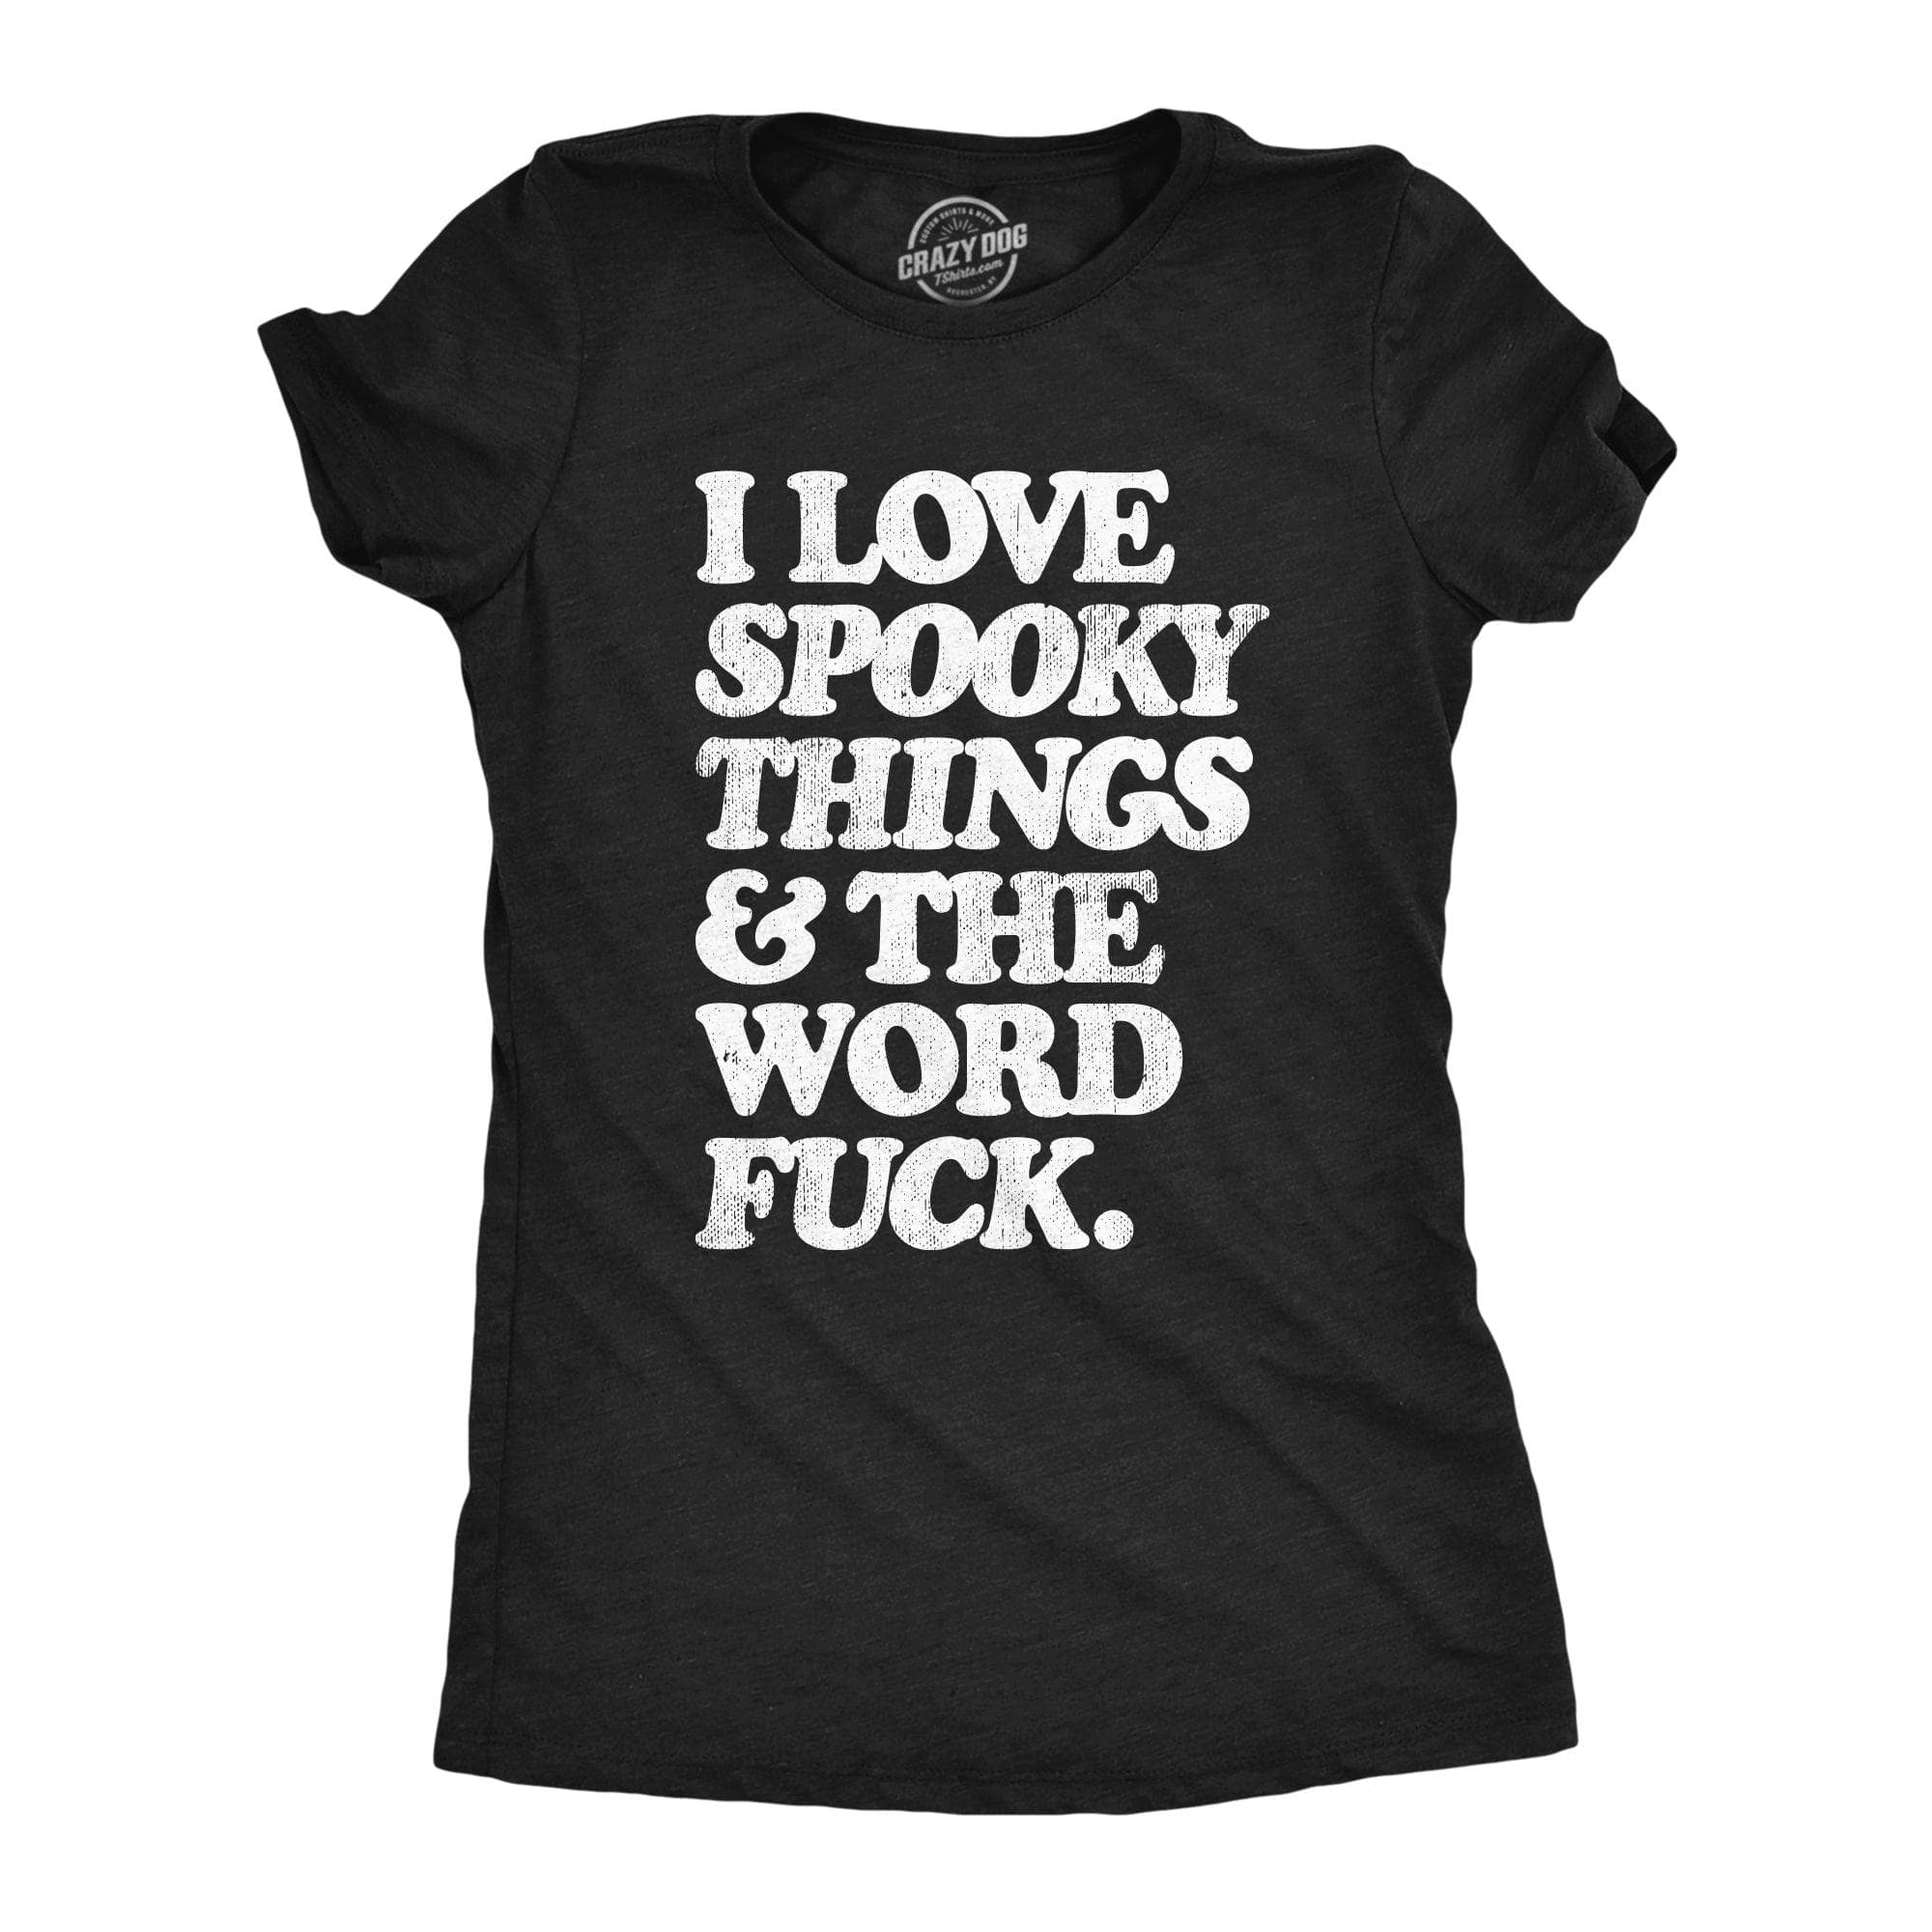 I Love Spooky Things And The Word Fuck Women's Tshirt  -  Crazy Dog T-Shirts